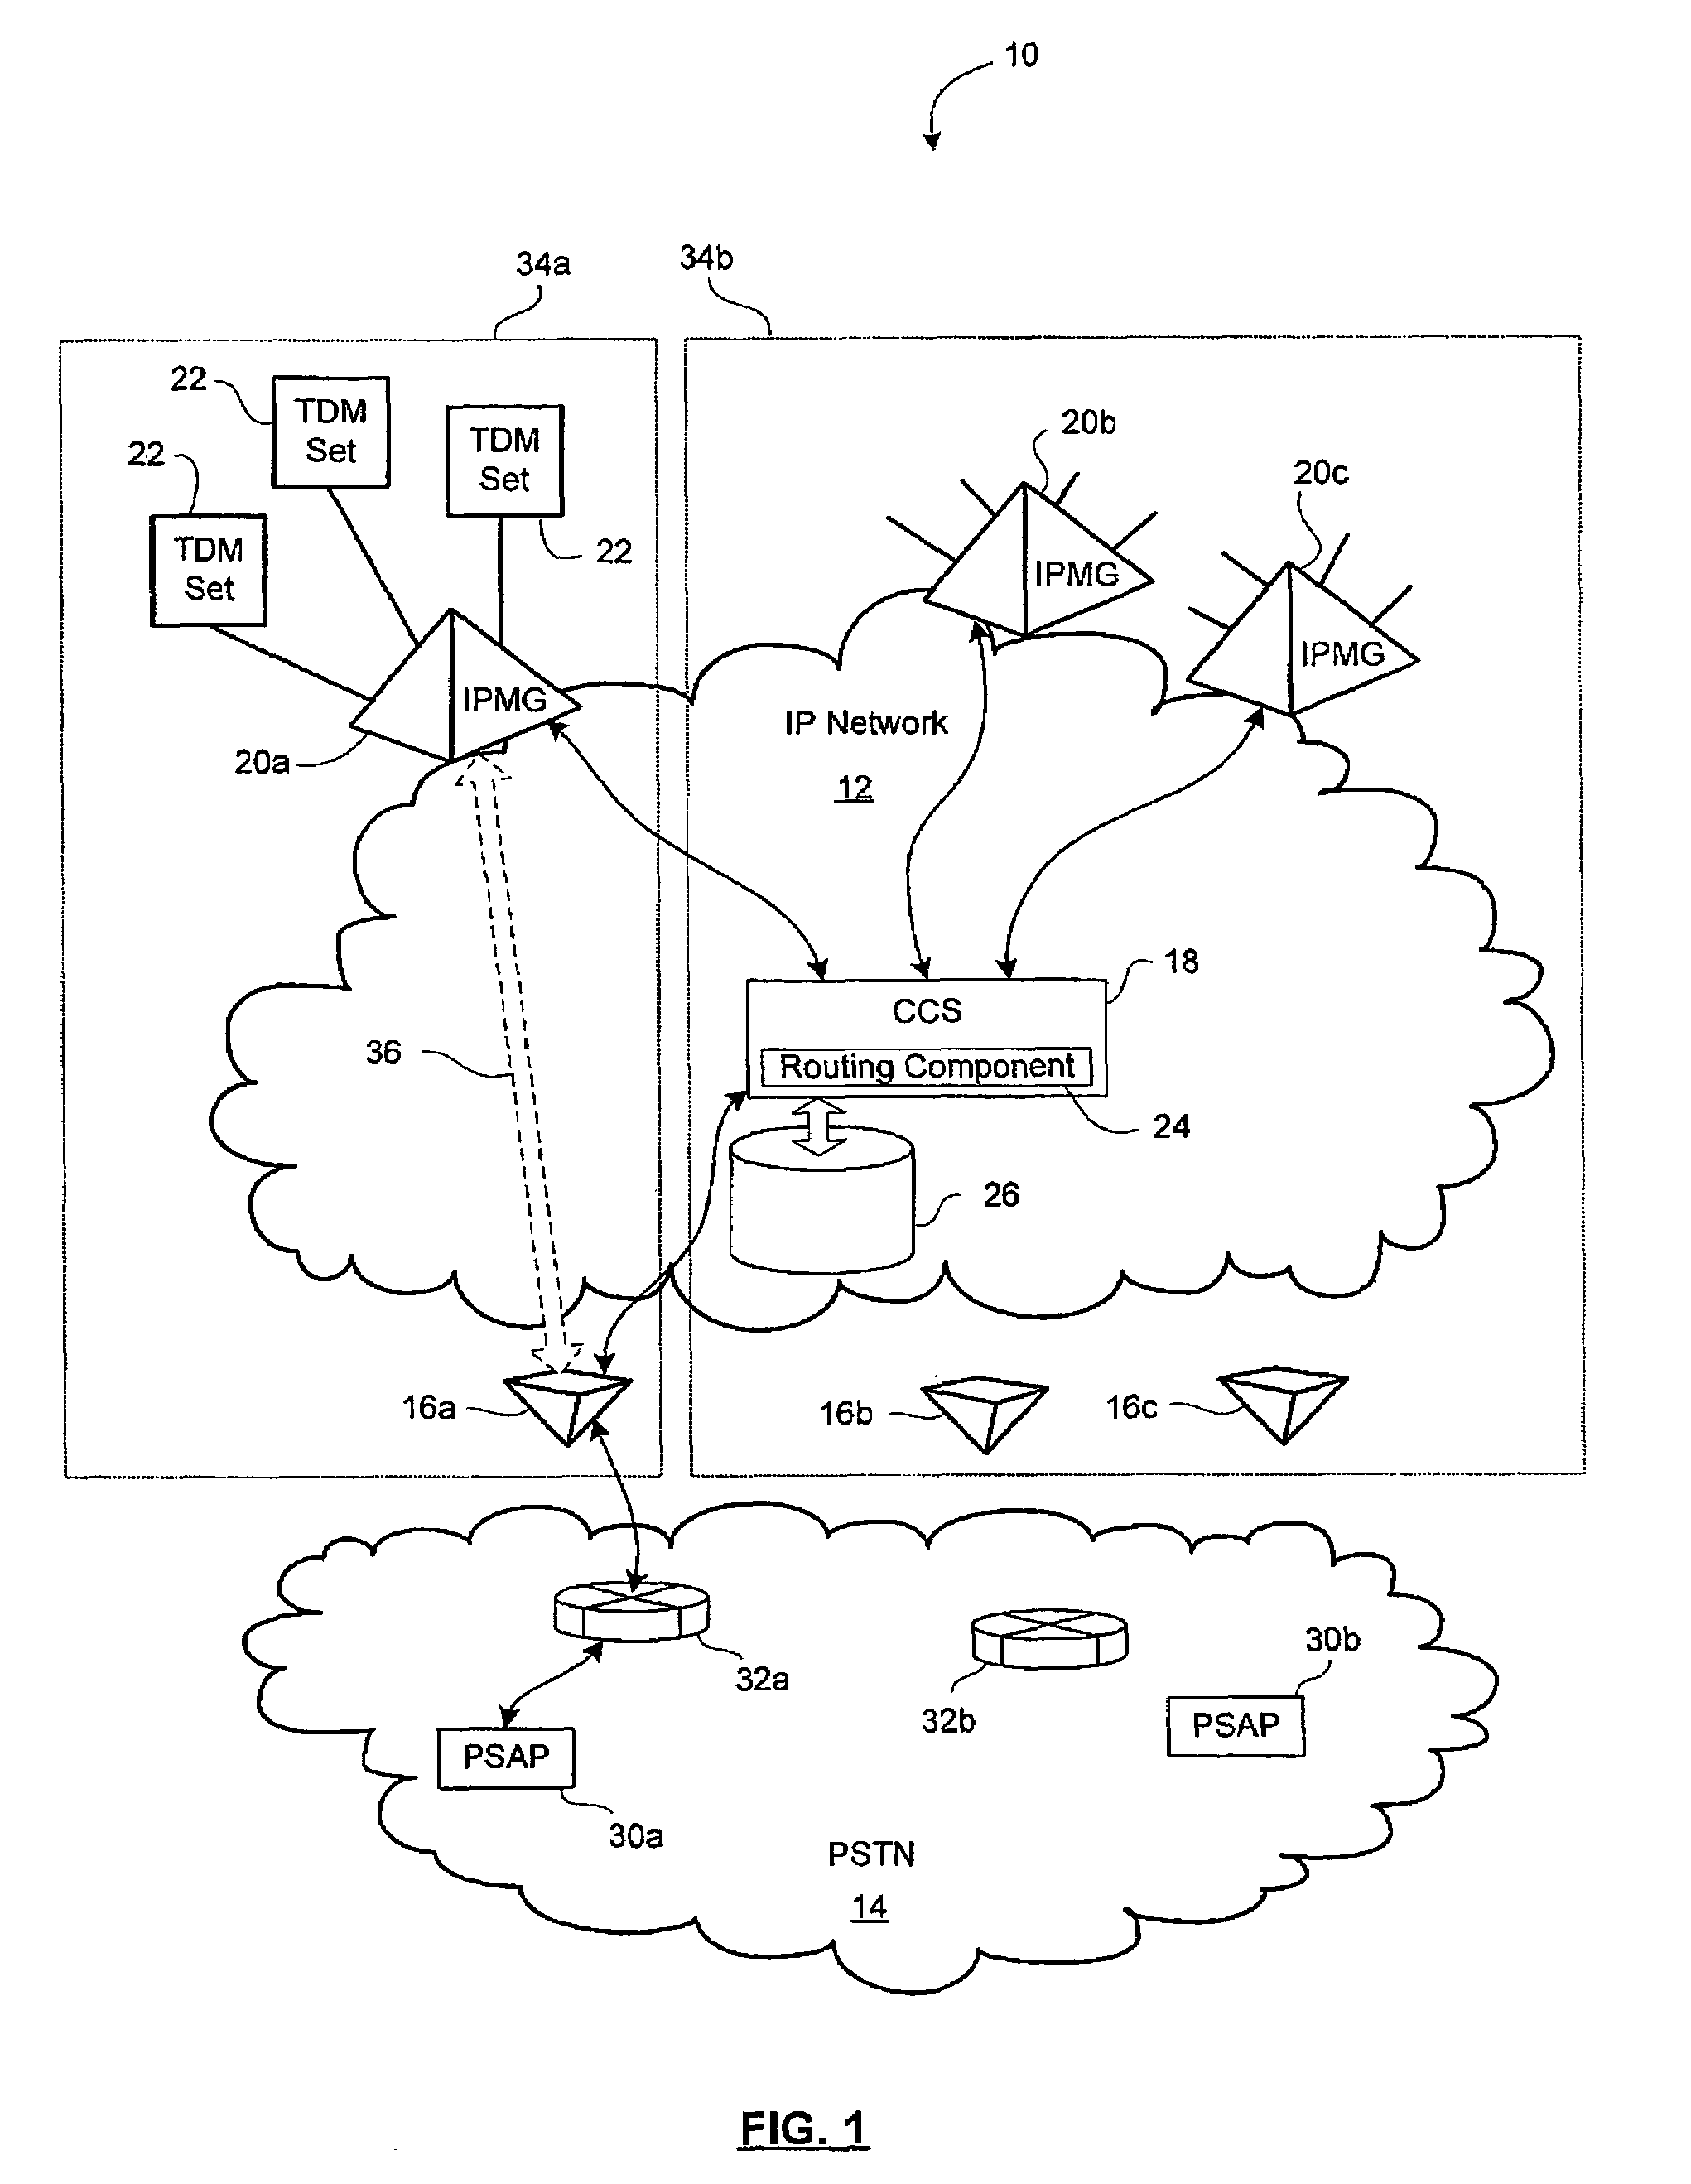 Localization of call routing for TDM sets in an IP network